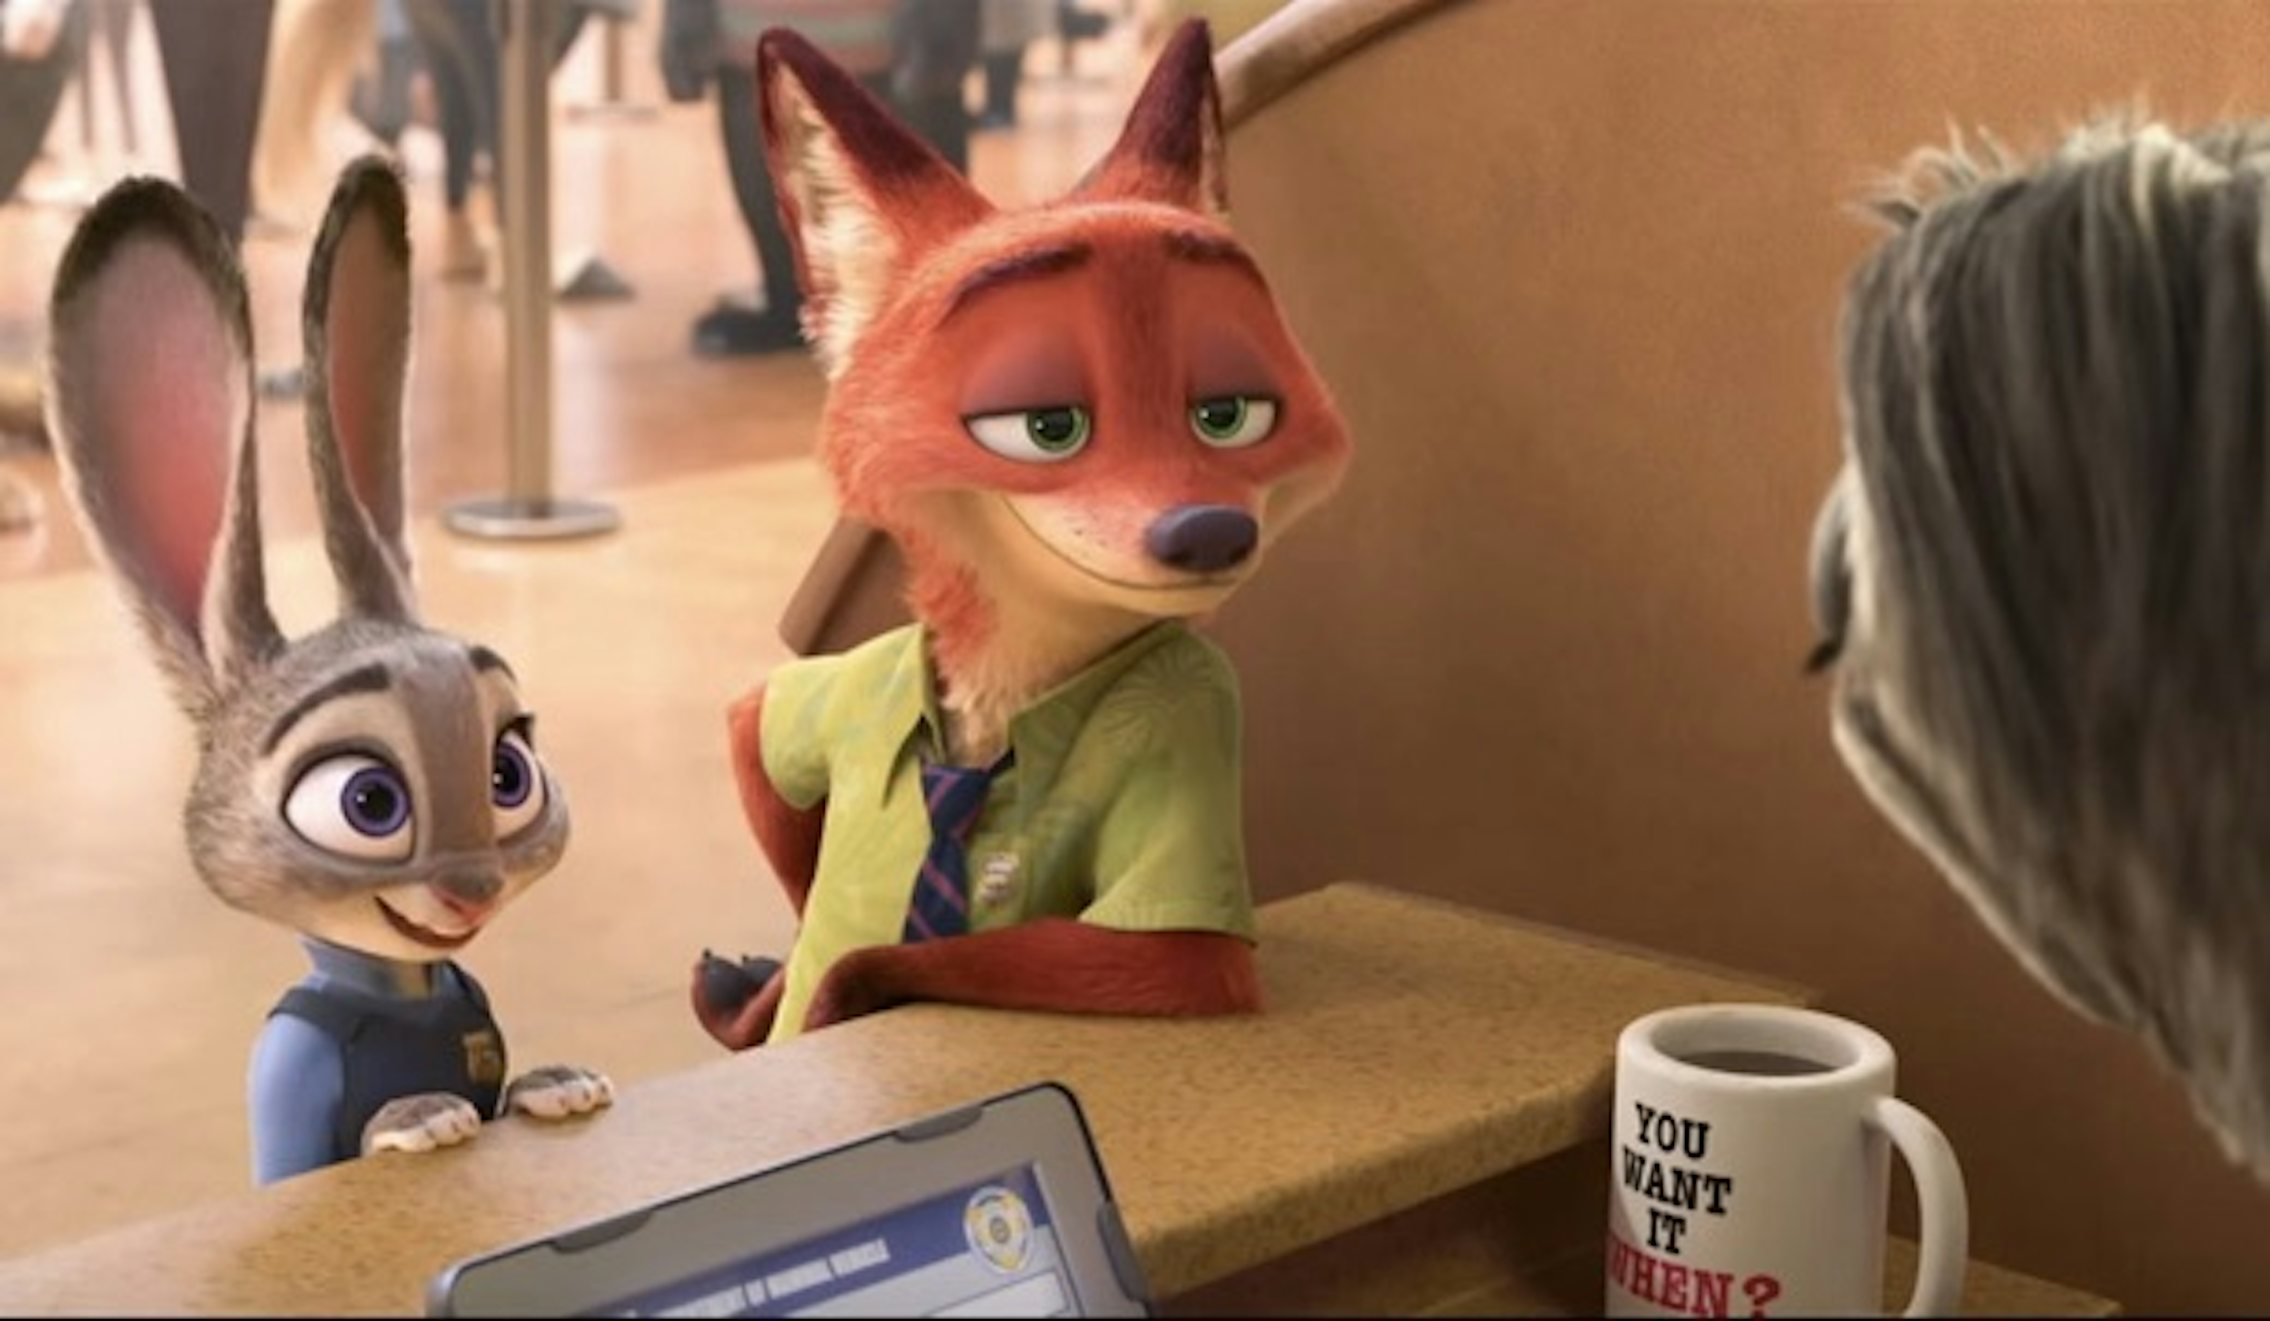 Furry Porn Zootopia 2016 - Disney is marketing 'Zootopia' to furries because it would be crazy not to  - The Daily Dot